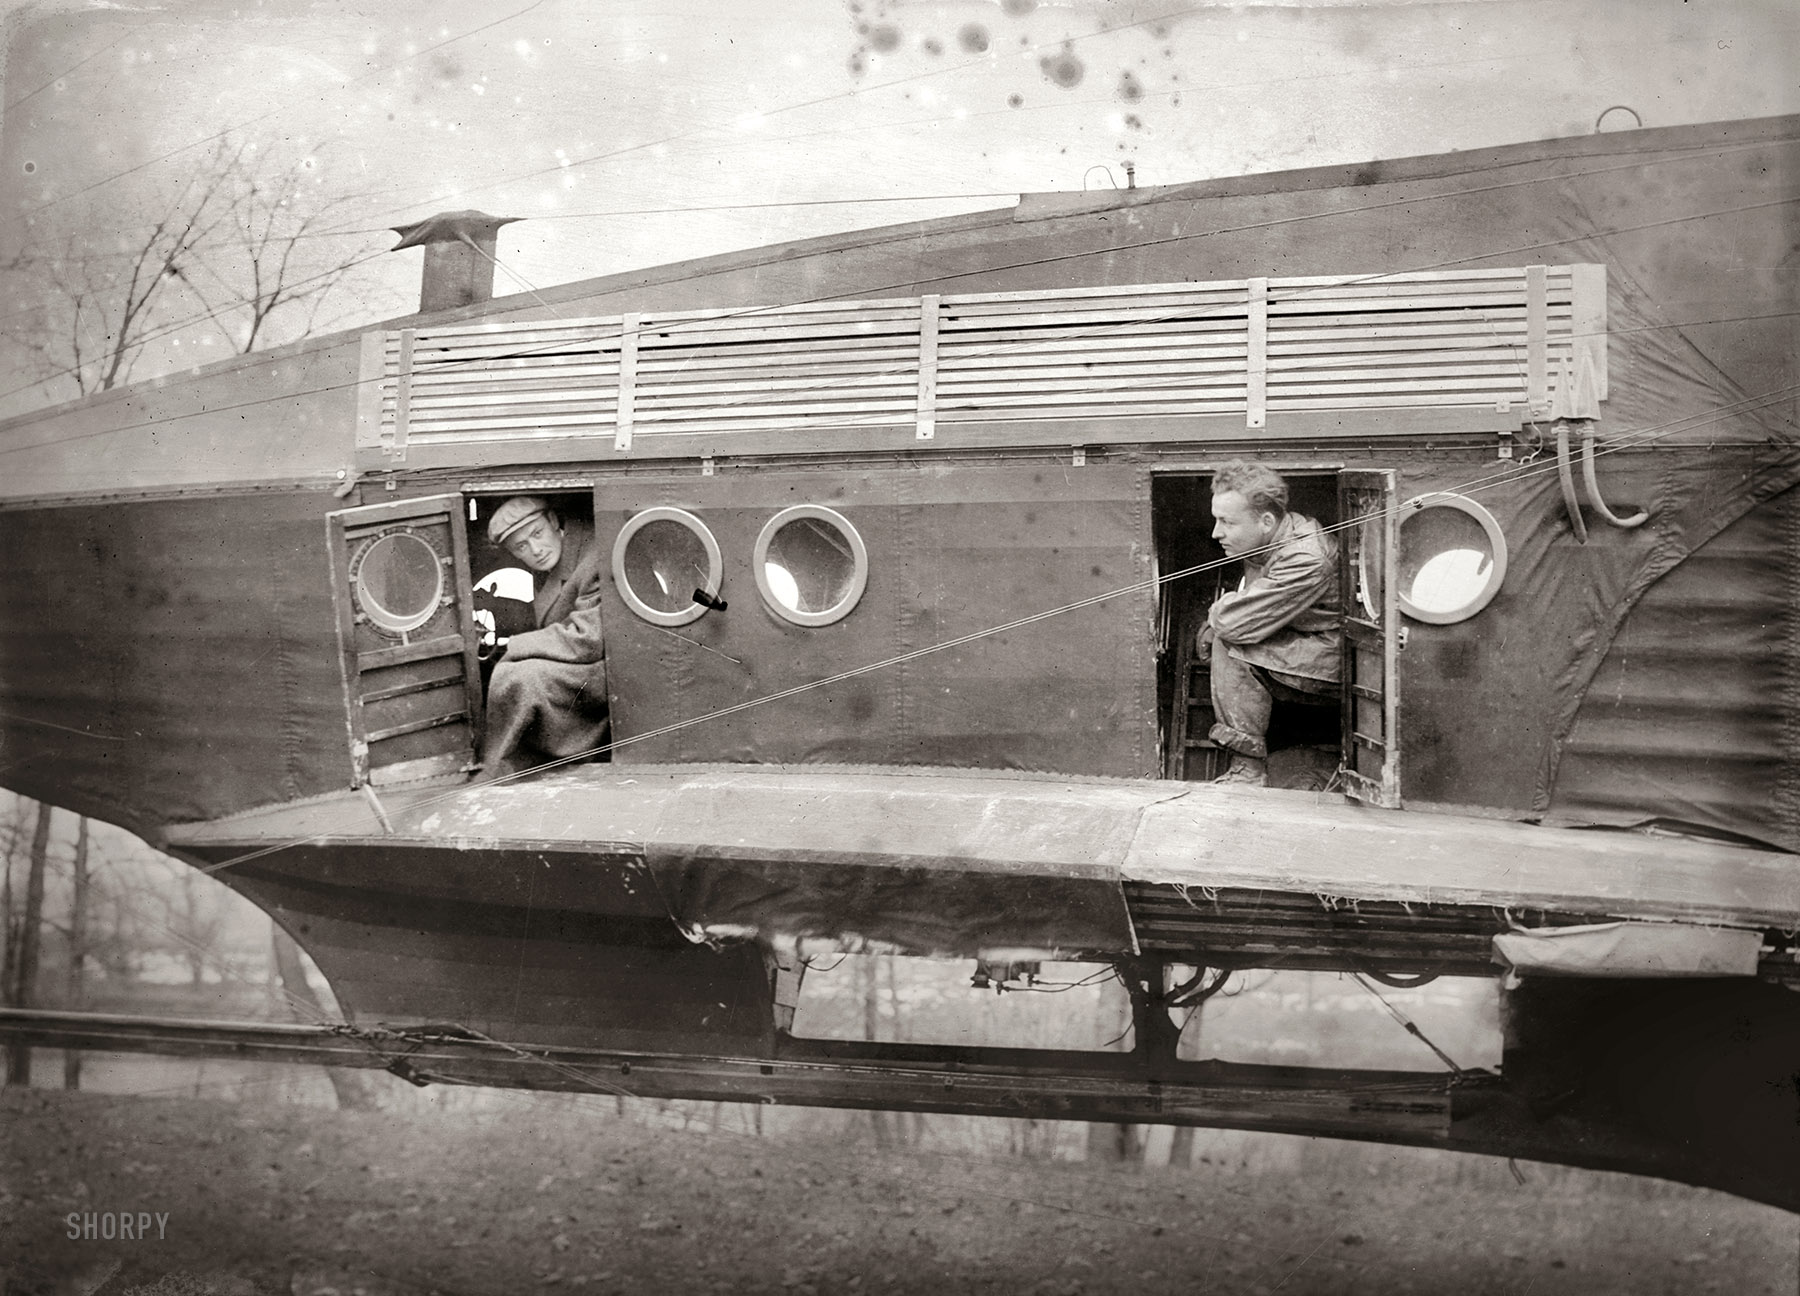 Rochester, N.Y., ca 1910. "Cooley Airship. The aviator sits in the front to manage the wheel and the engineer sits six feet behind to control the engines." John Cooley's giant kitelike aircraft, of a design dating to the 1890s, was something of an aeronautical dead end. More here as well as here. Bain News Service print of a glass plate now in the Albert R. Stone Negative Collection. View full size.